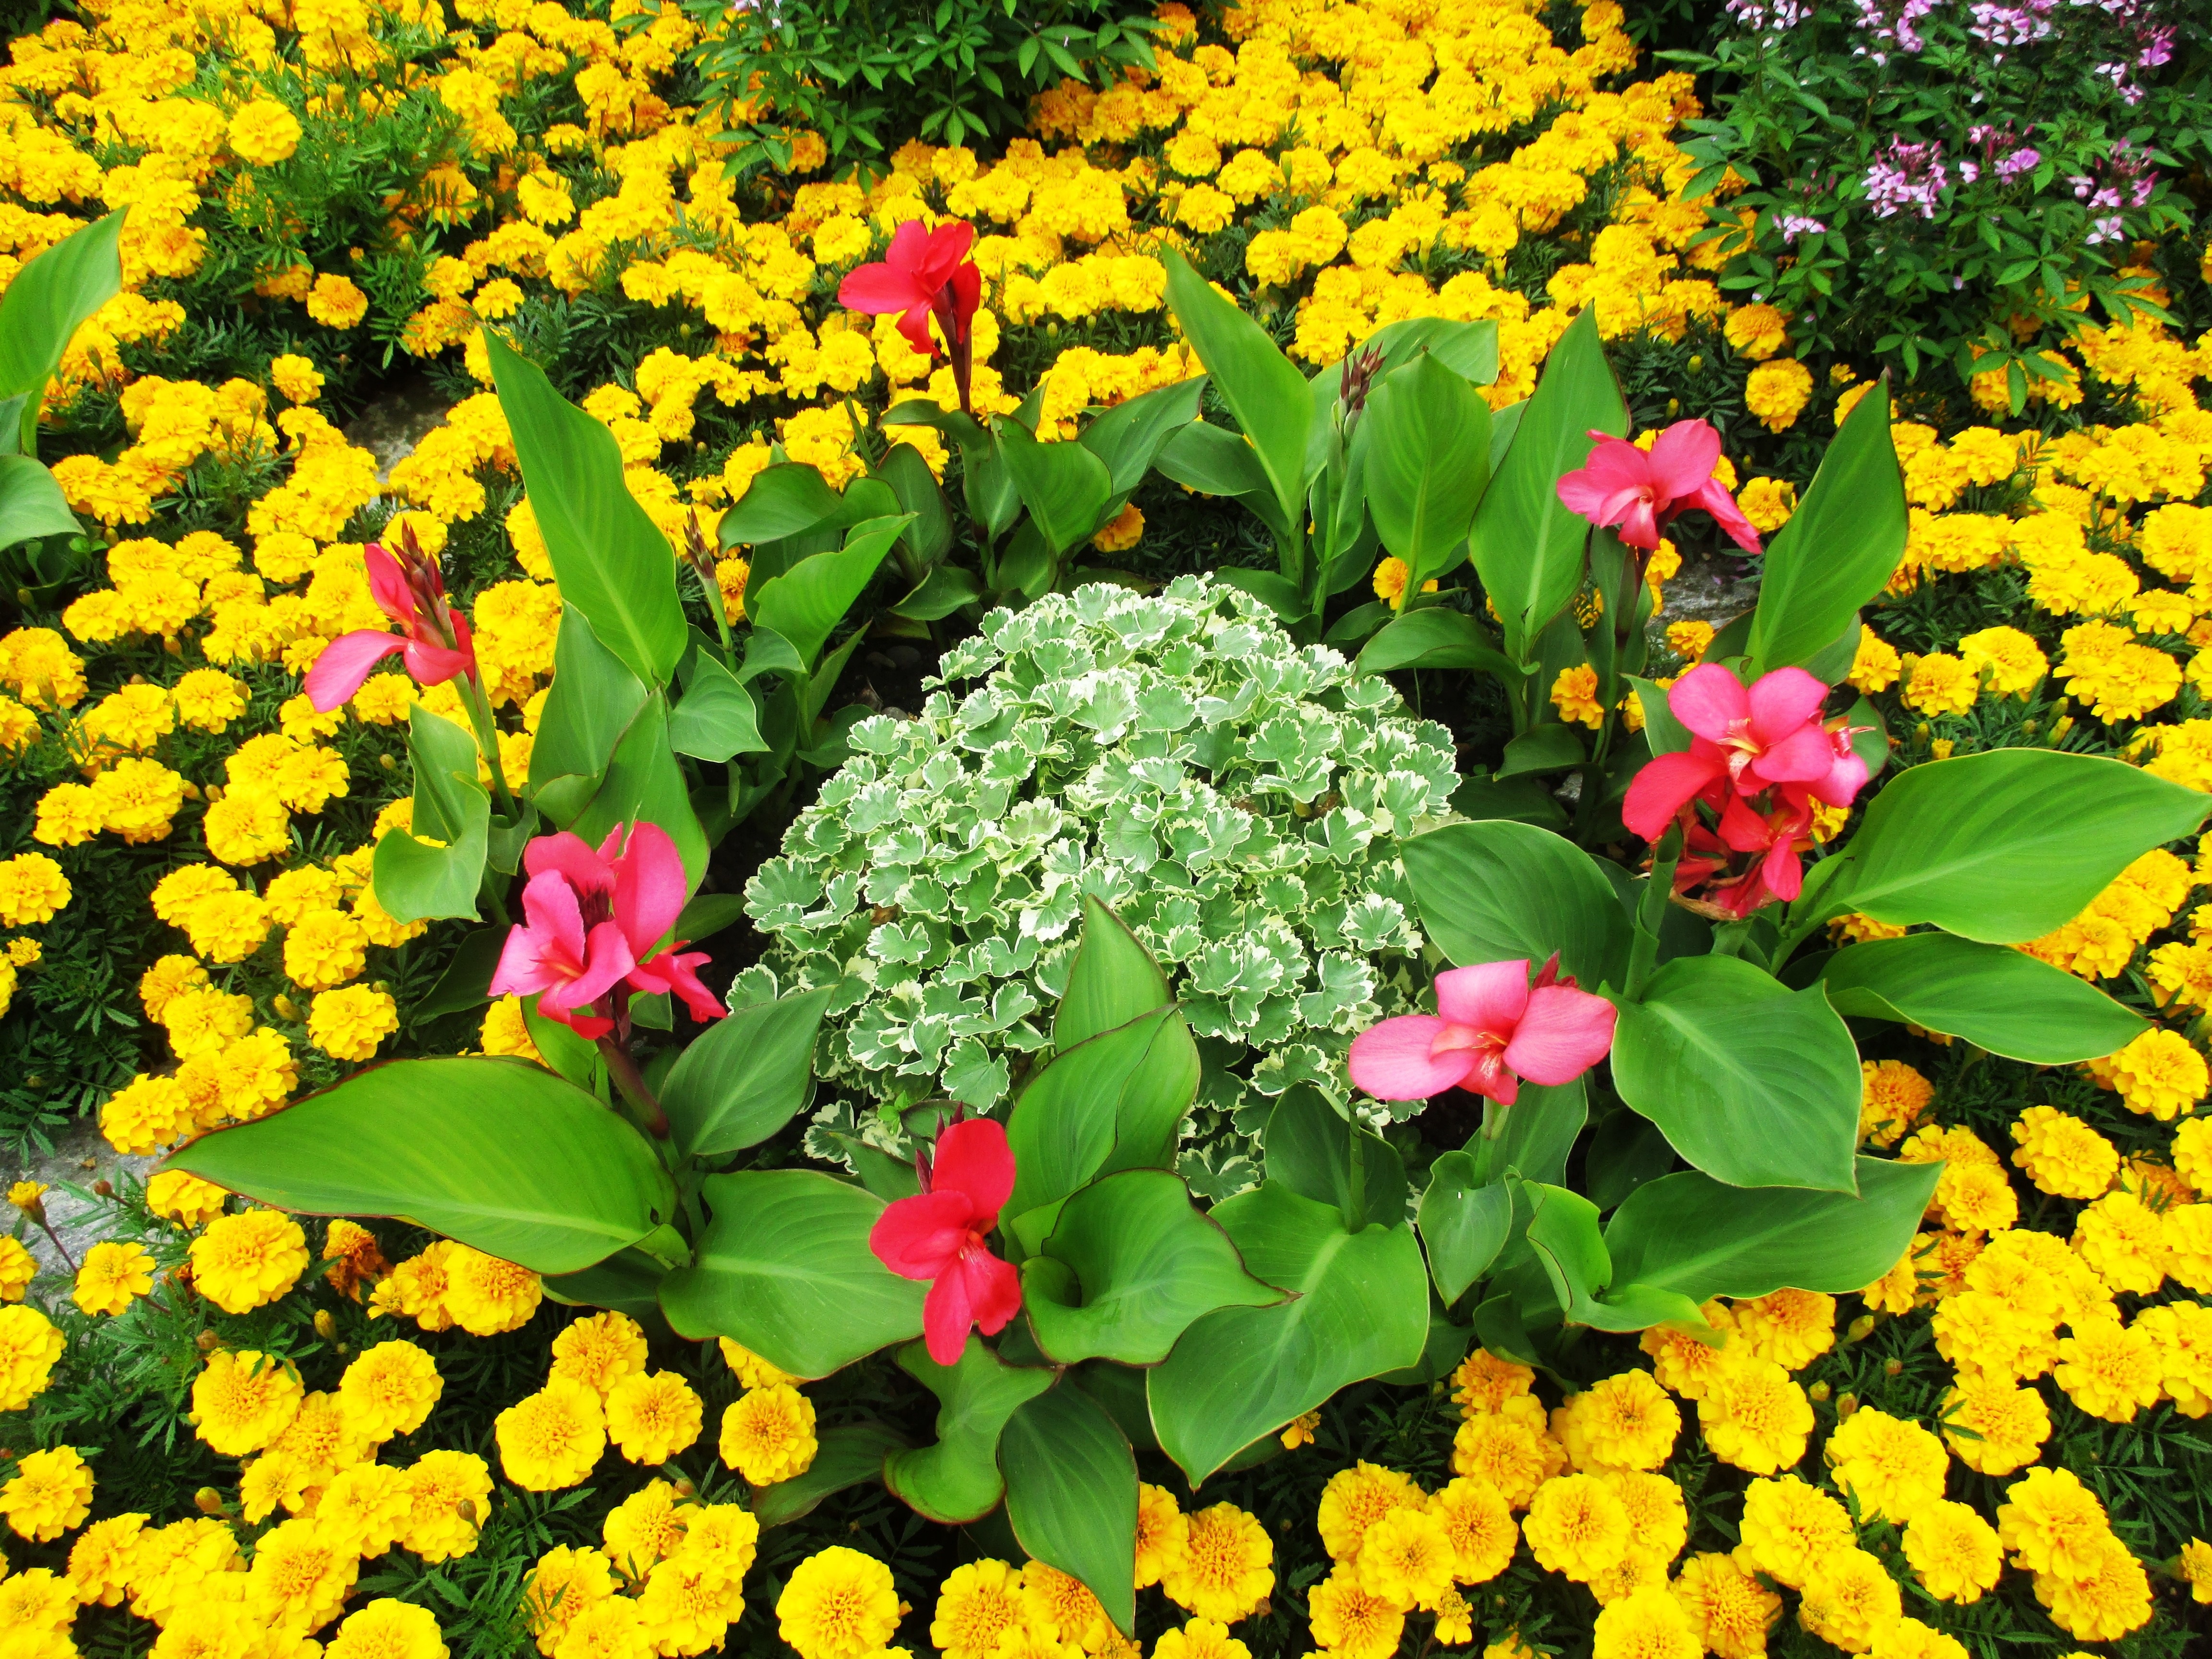 pink canna lilies with yellow marigolds plants